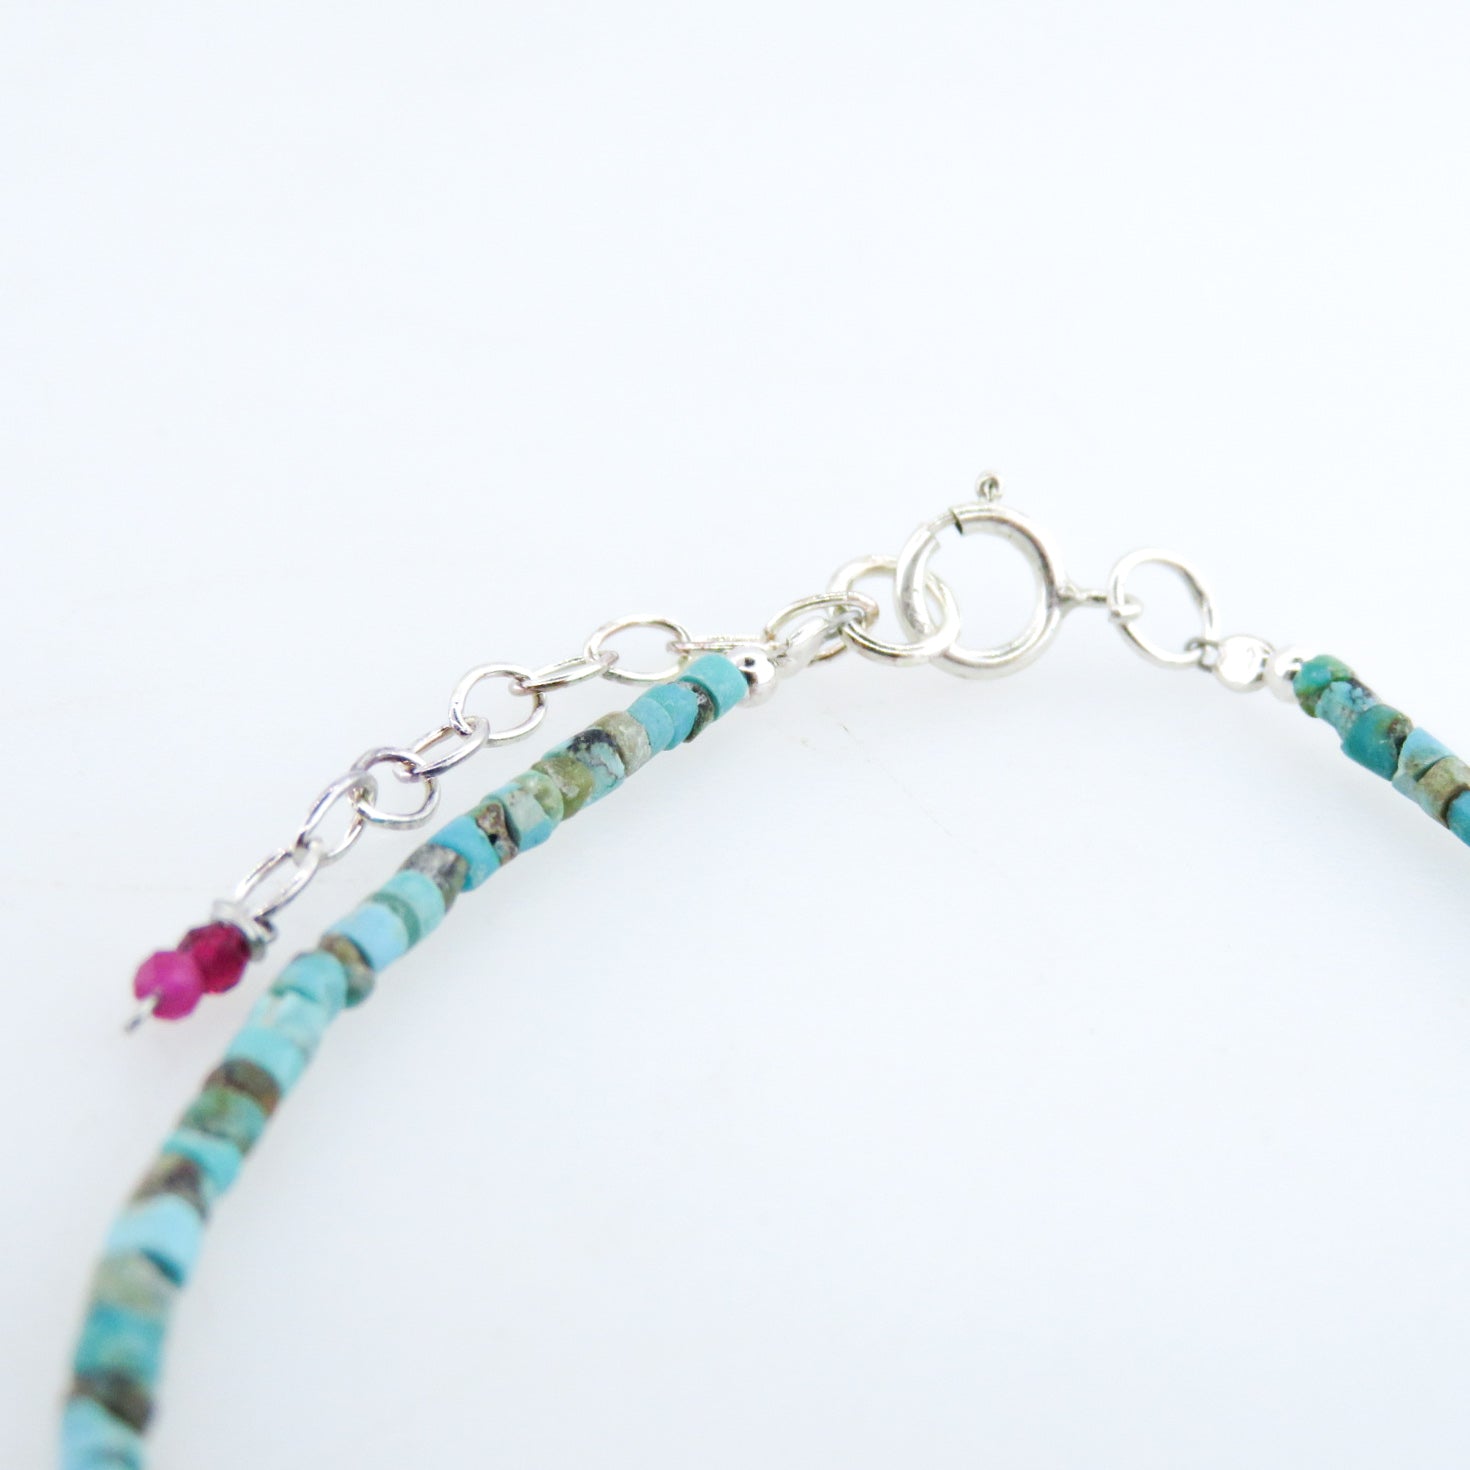 Turquoise Bracelet with Iolite, Garnet and Silver Beads